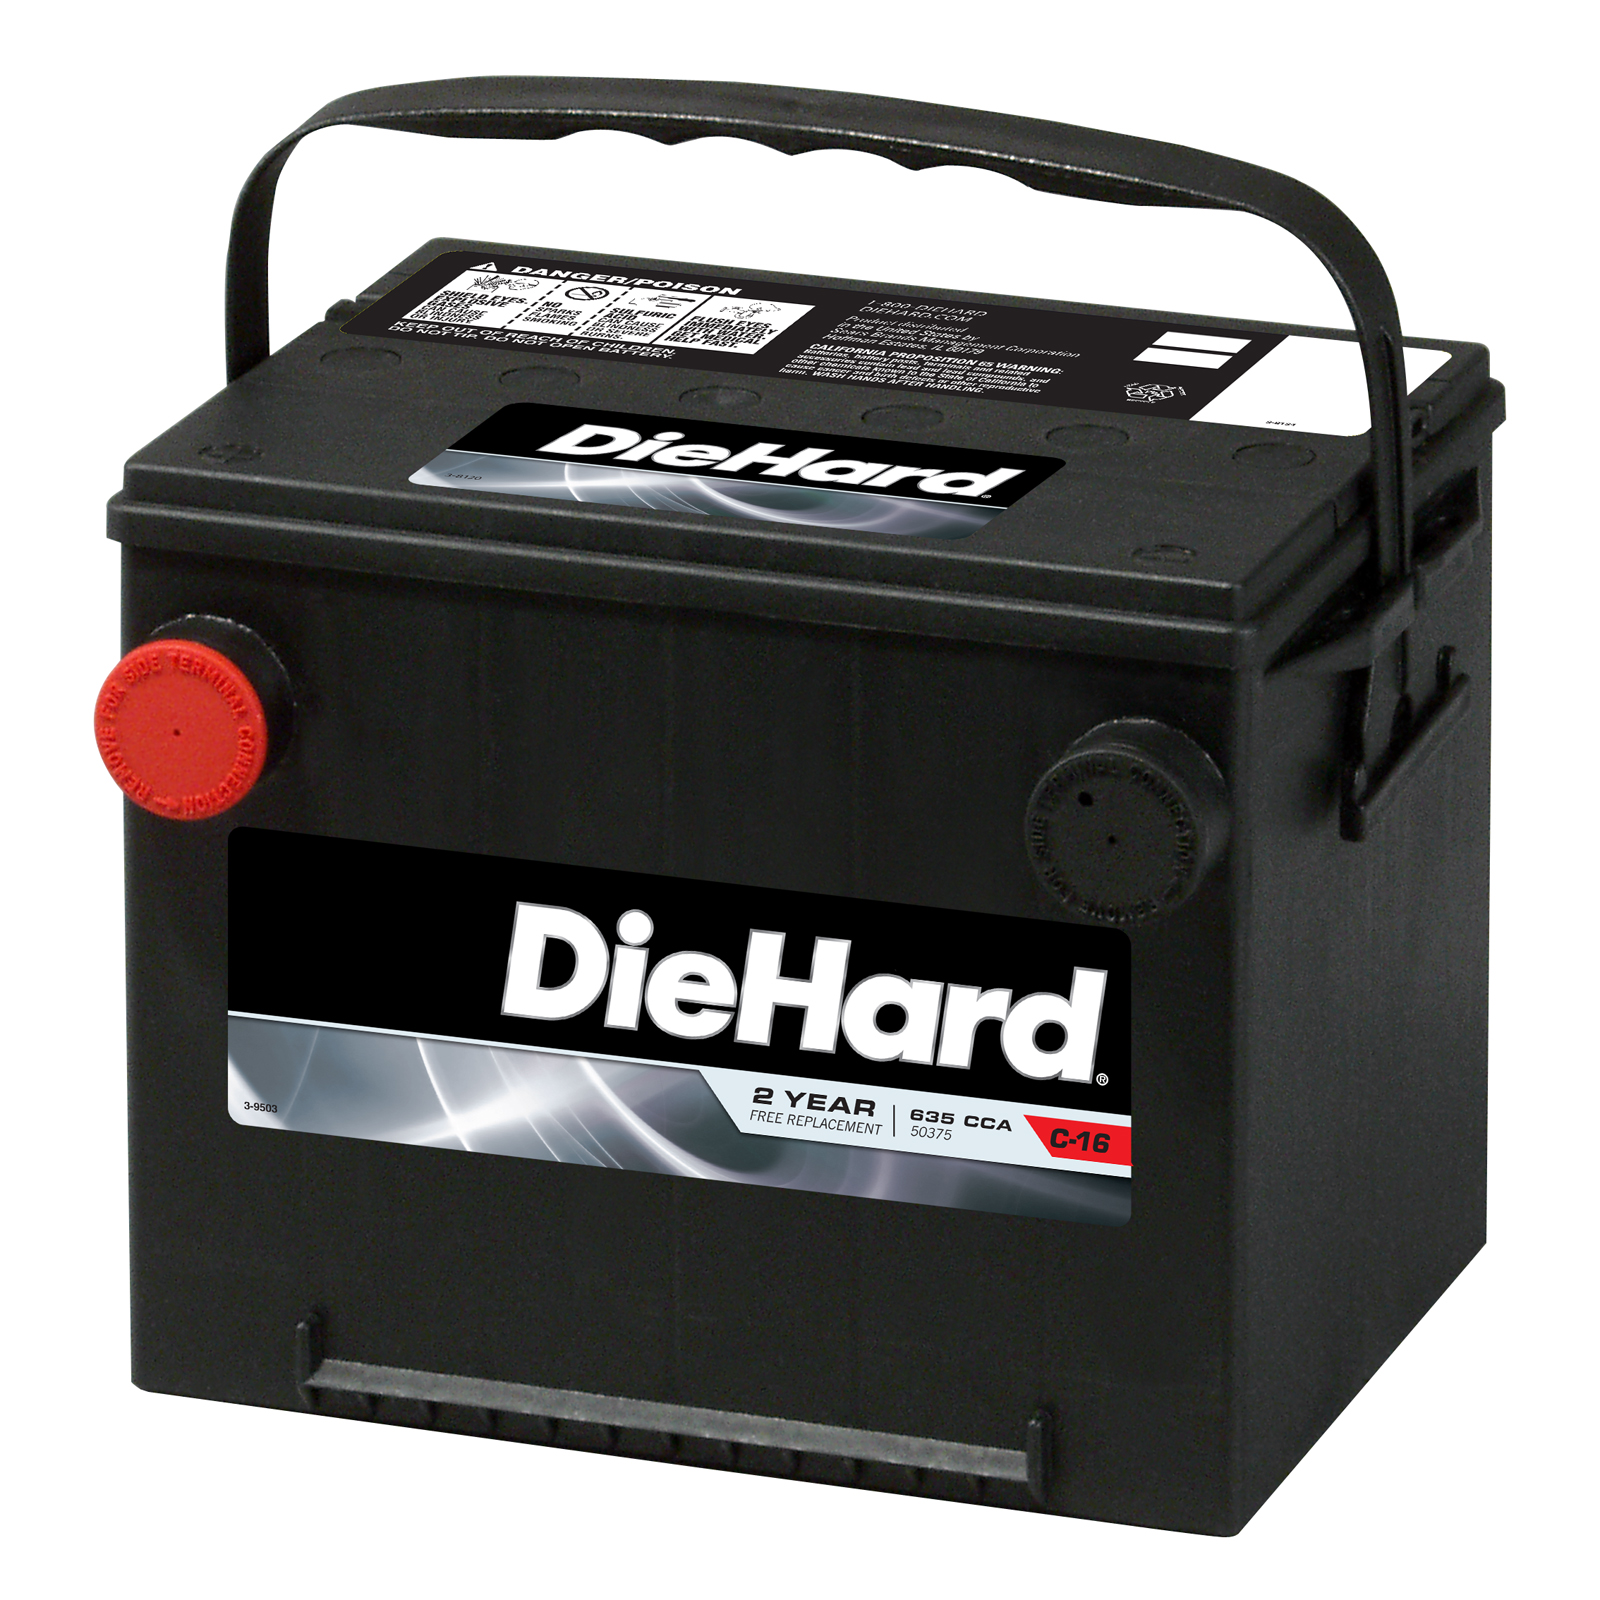 DieHard Automotive Battery - Group Size EP-75 (Price with Exchange)